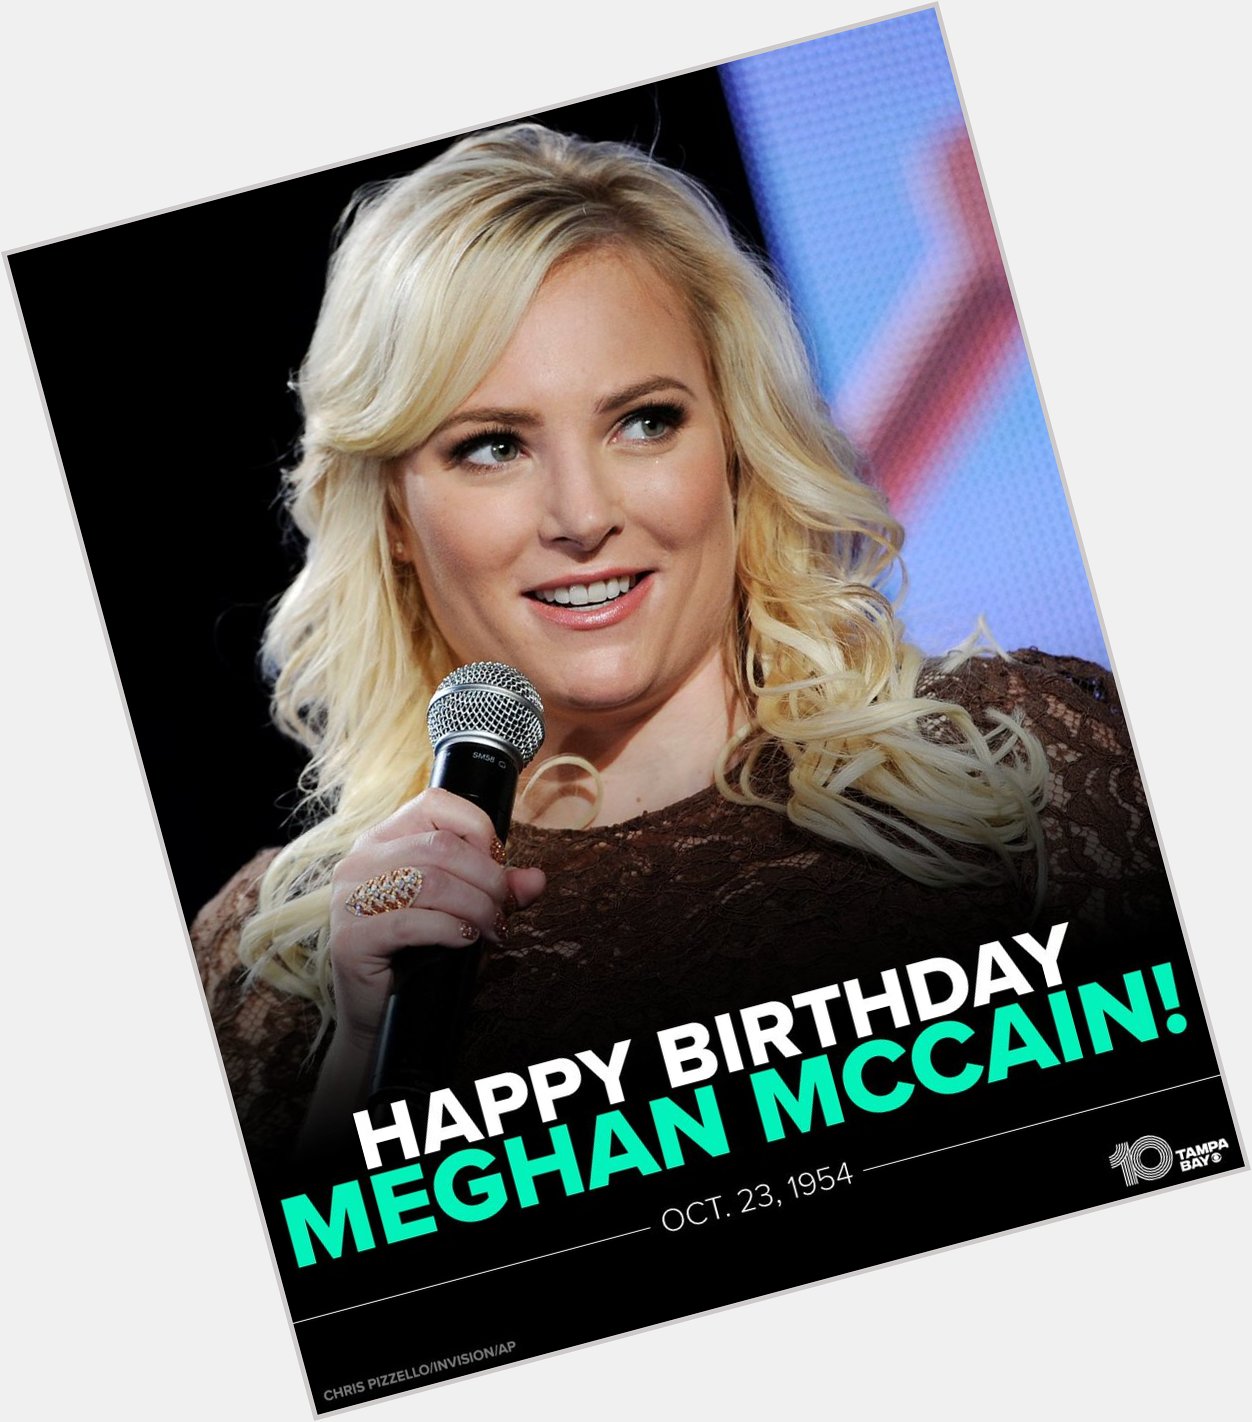 Happy 36th Birthday Meghan McCain!! The daughter of the late John McCain was born on this day in Phoenix, Arizona. 